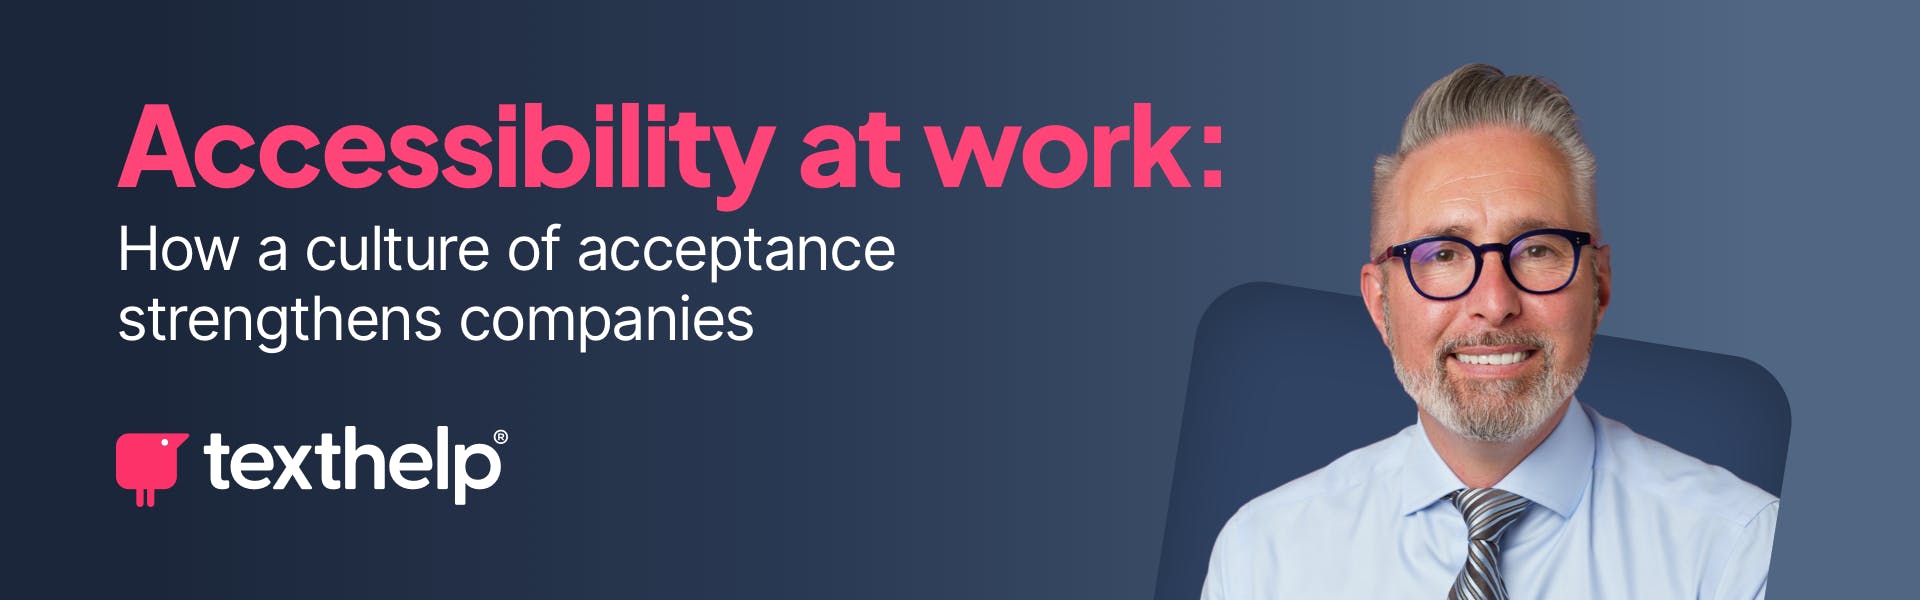 Accessibility at work: how a culture of acceptance strengthens companies. Image also features a headshot of Martin McKay, Texthelp CEO